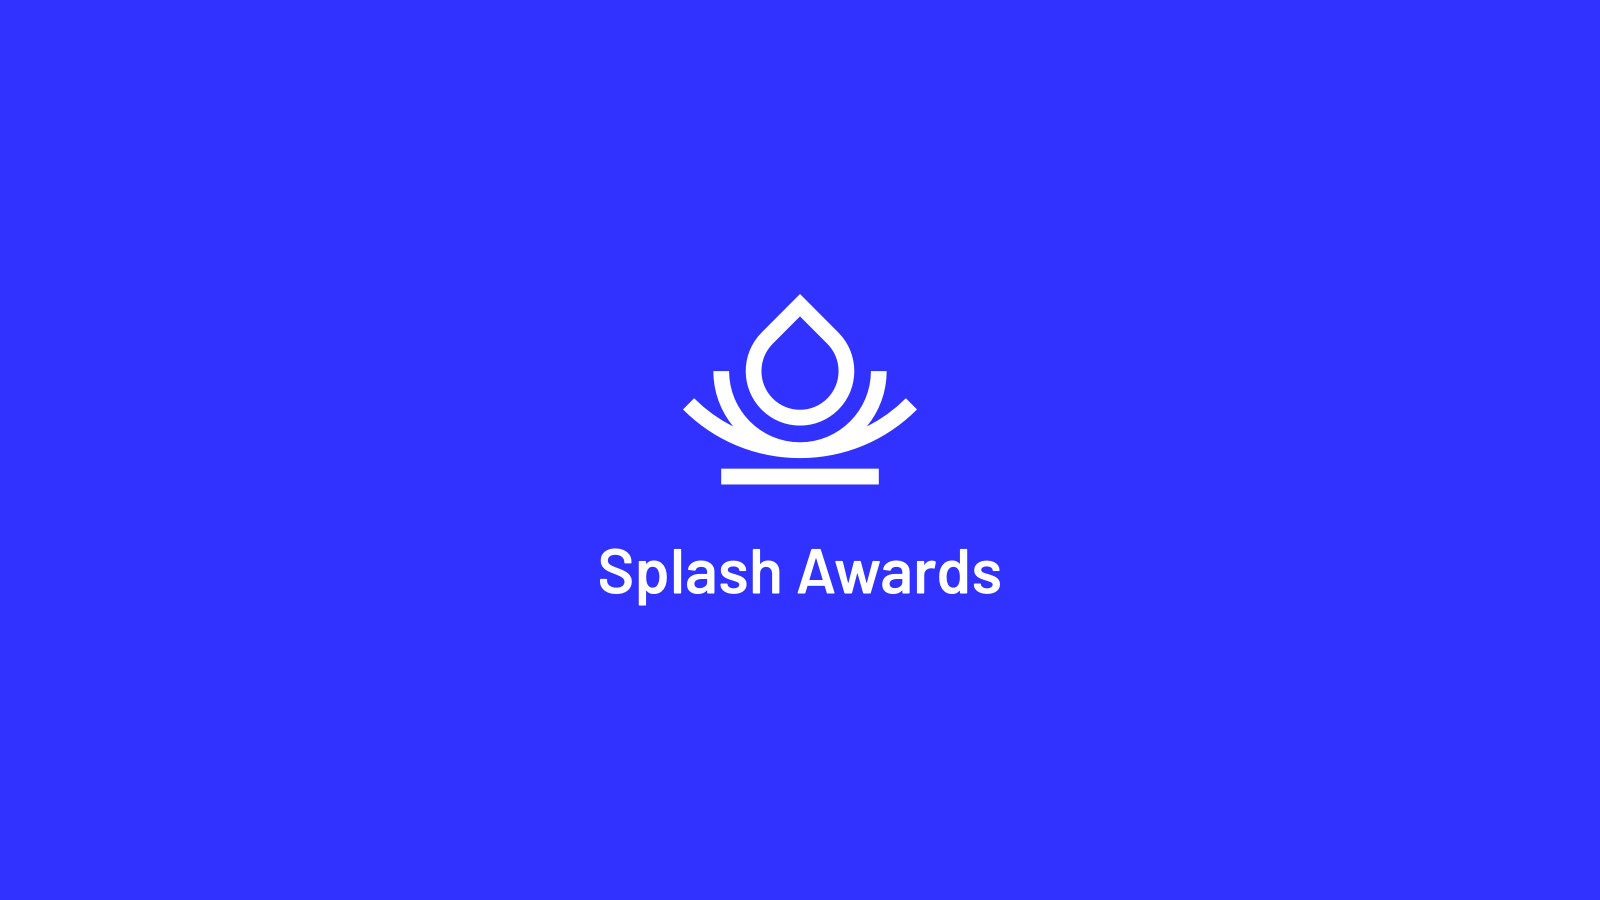 A versatile and adaptive brand for the international Splash Awards by Haelsum